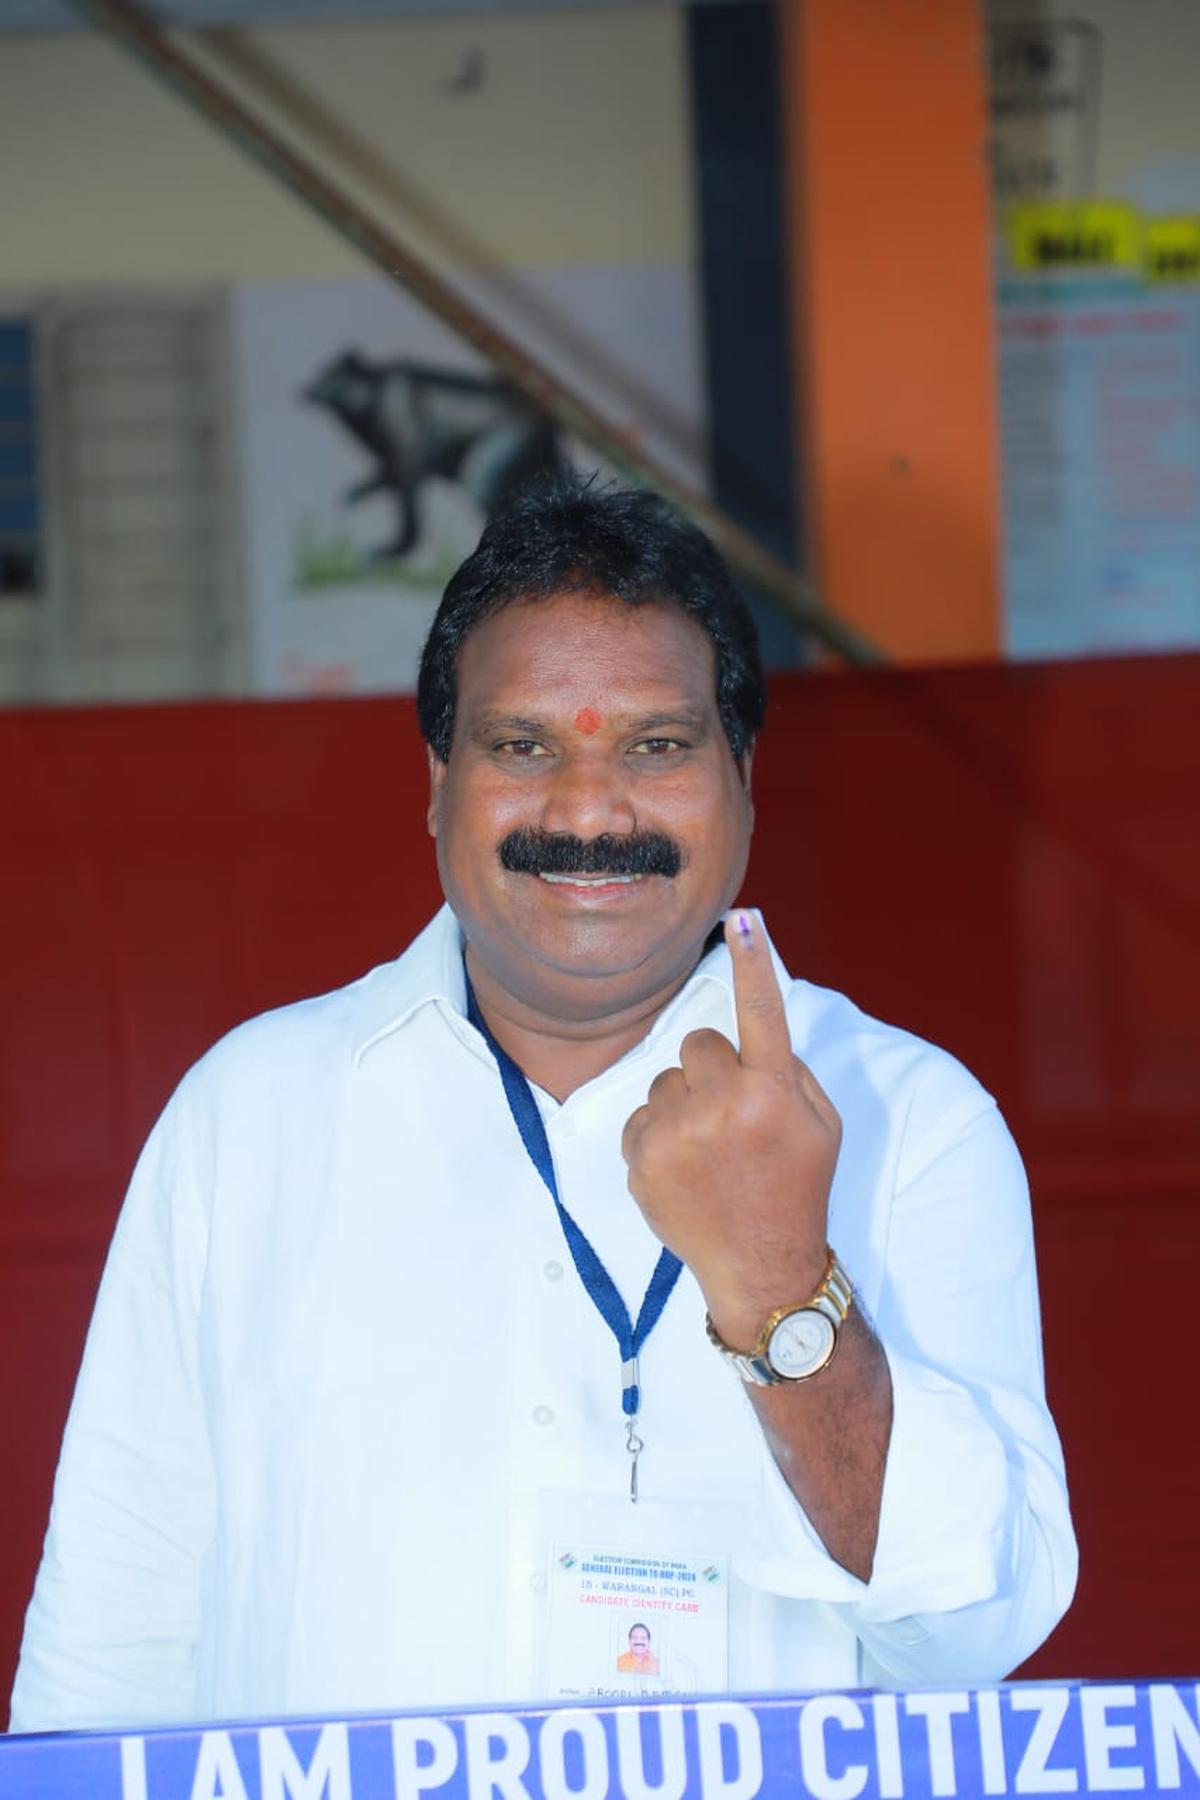 Aroori Ramesh, the BJP candidate from Warangal Parliamentary constituency, casts his vote at polling booth number 175 of Bishop Beretta School in Fathima Nagar in Hanamkonda